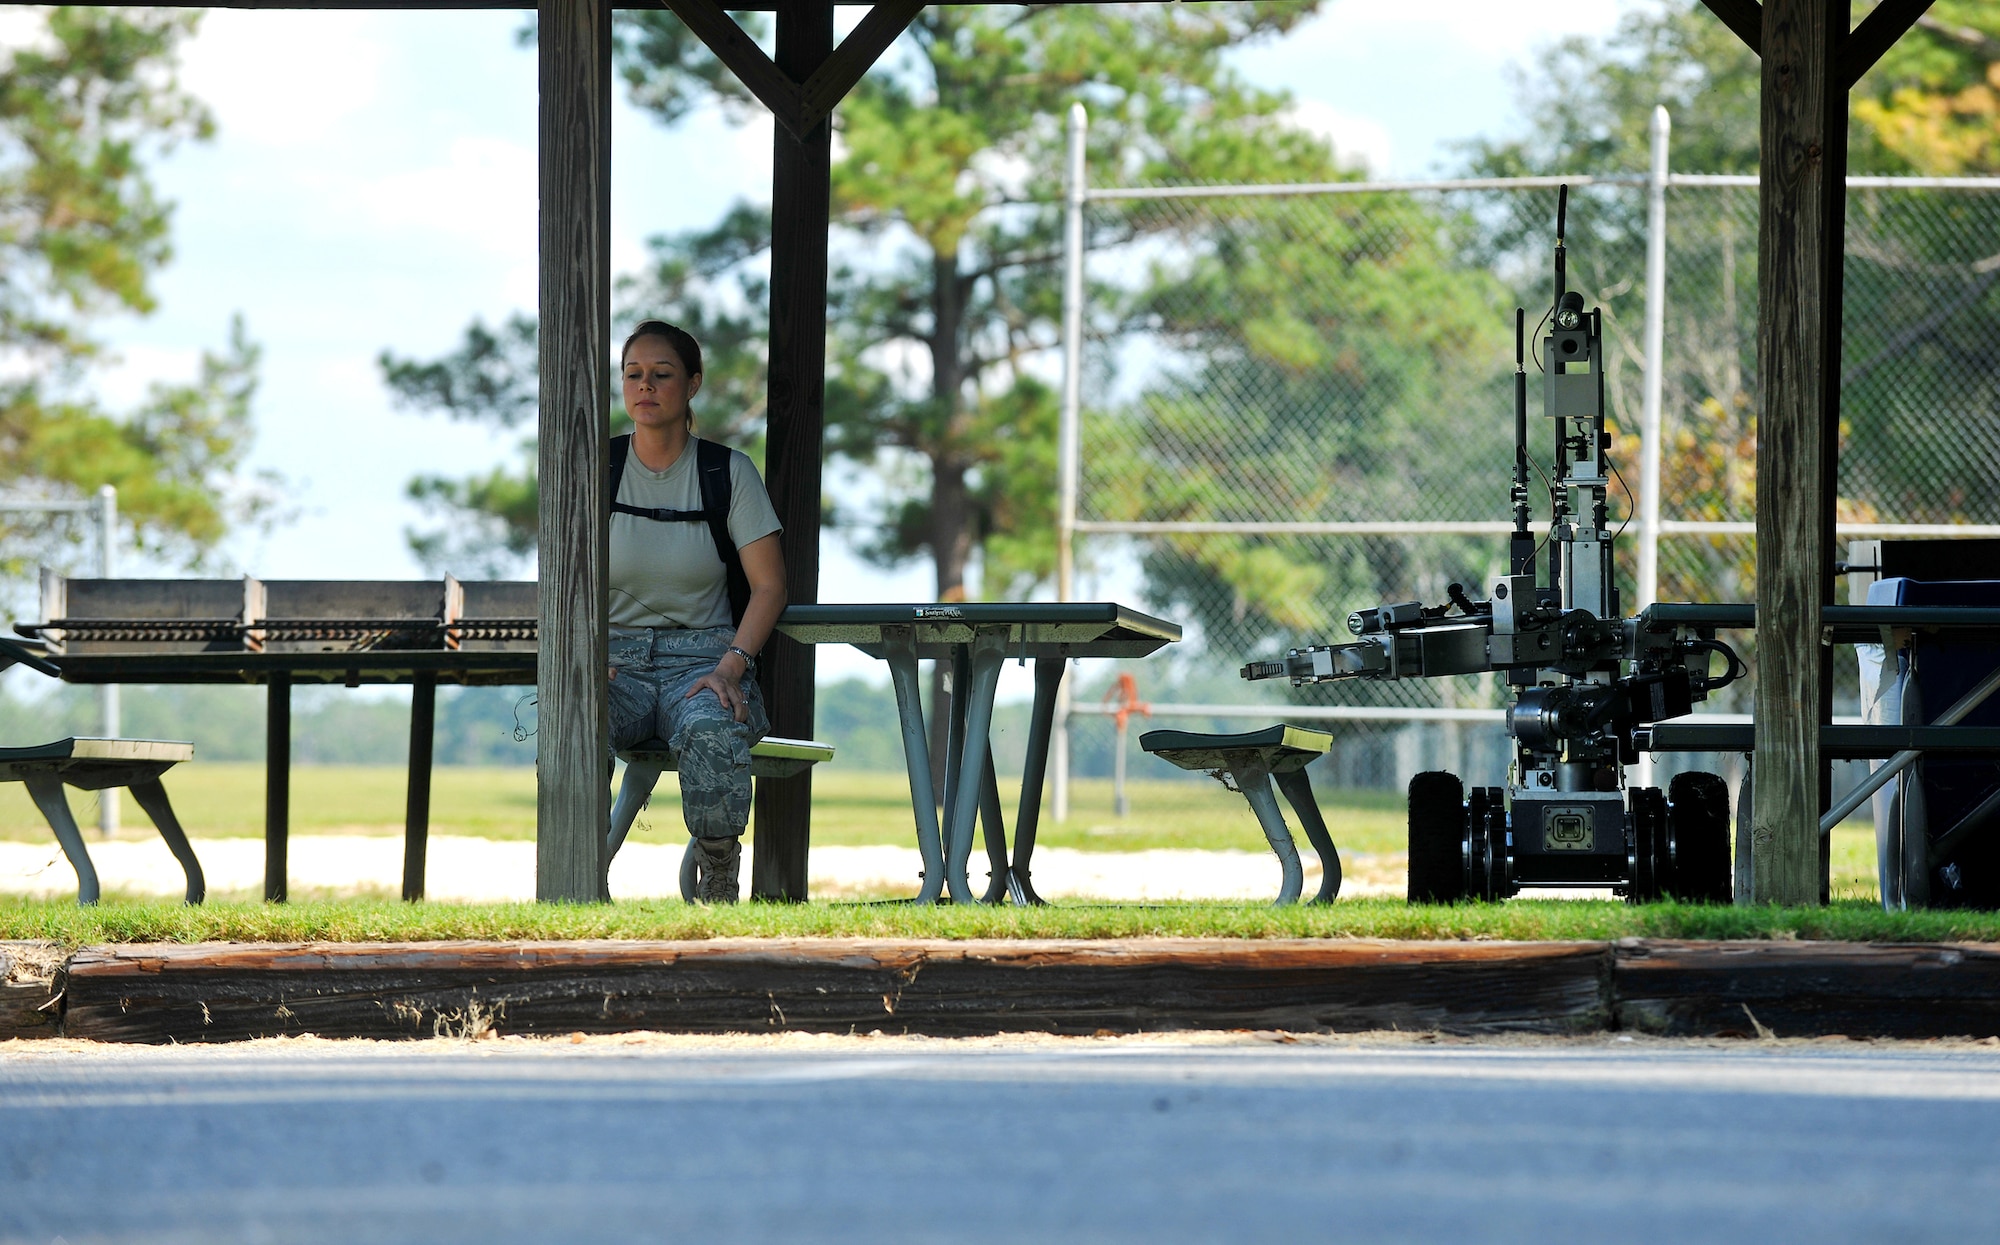 Staff Sgt. Rhianna Hall waits for an F6-A explosive ordnance disposal robot to assist her during a training exercise Oct. 13, 2010, at Moody Air Force Base, Ga. Technicians from the 23rd Civil Engineer Explosive Ordnance Disposal Flight tested out their new Bomb Squad Emergency Response Vehicle during the exercise to test its ability to respond in emergency situations. Sergeant Hall is the combat arms training and maintenance range instructor assigned to the 23rd Security Forces Squadron. (U.S. Air Force photo/Airman 1st Class Joshua Green)